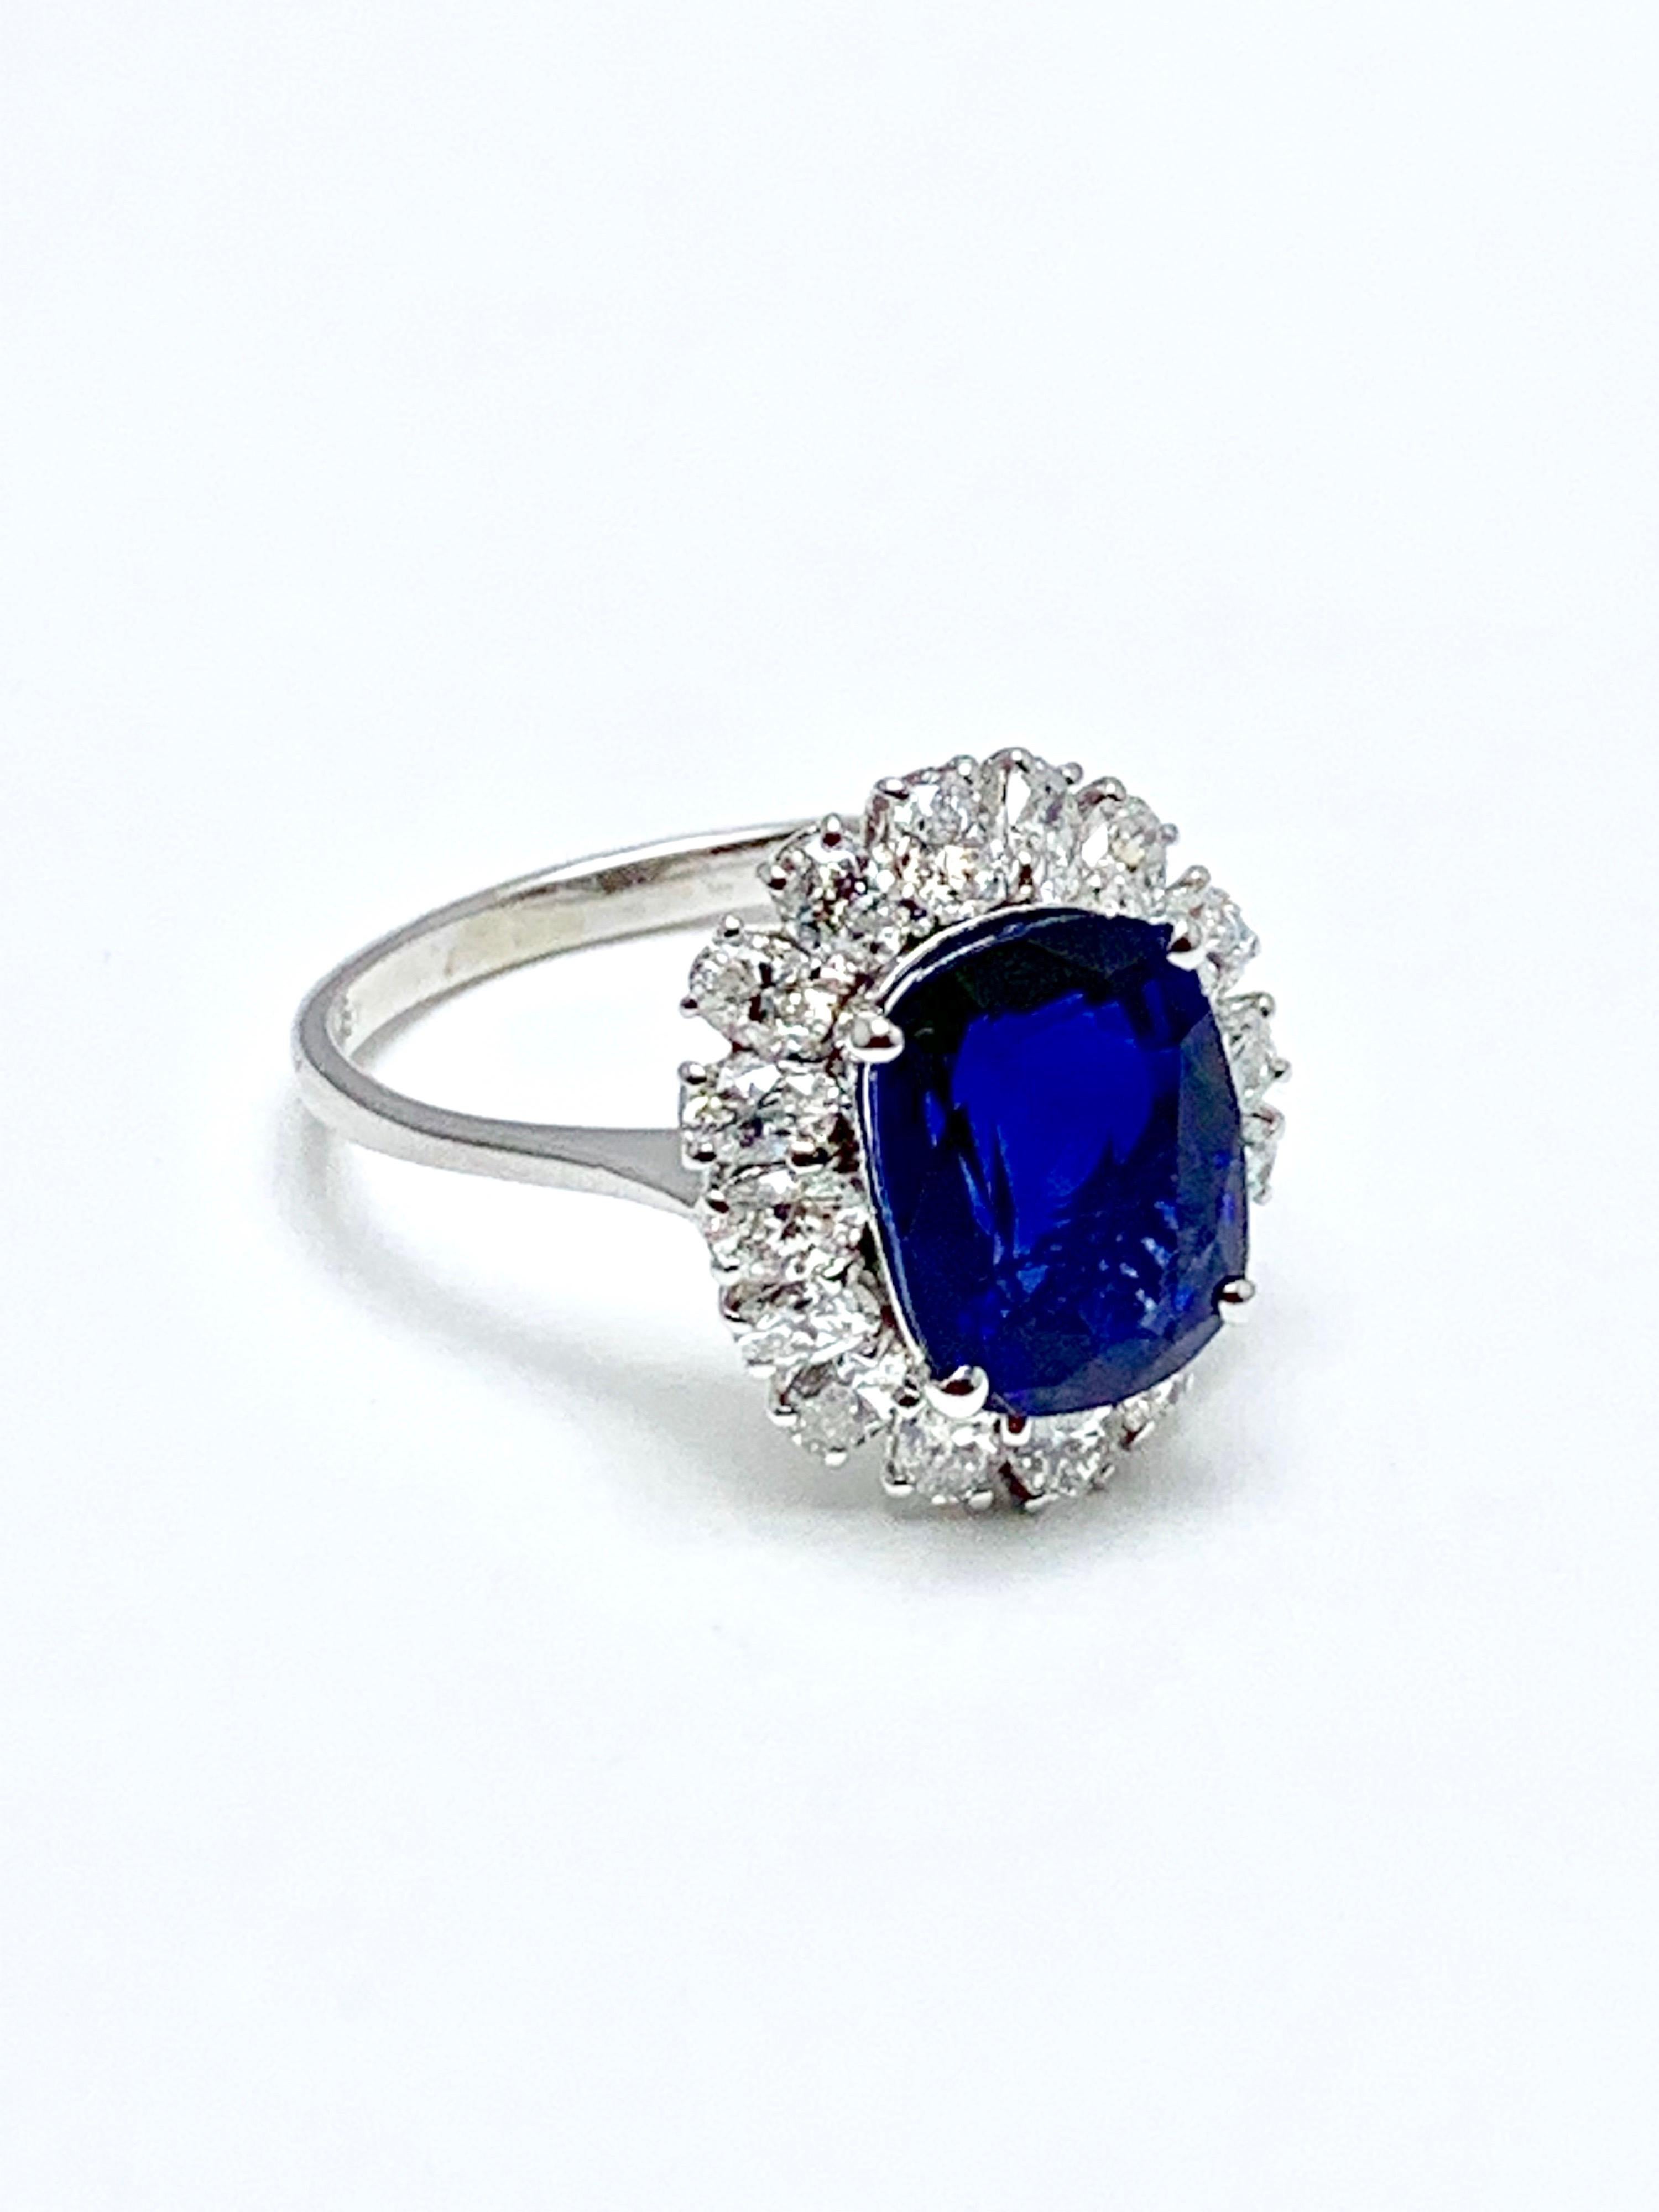 4.60 Carat Cushion Cut Sapphire and Oval Diamond Halo White Gold Cocktail Ring In Excellent Condition For Sale In Chevy Chase, MD